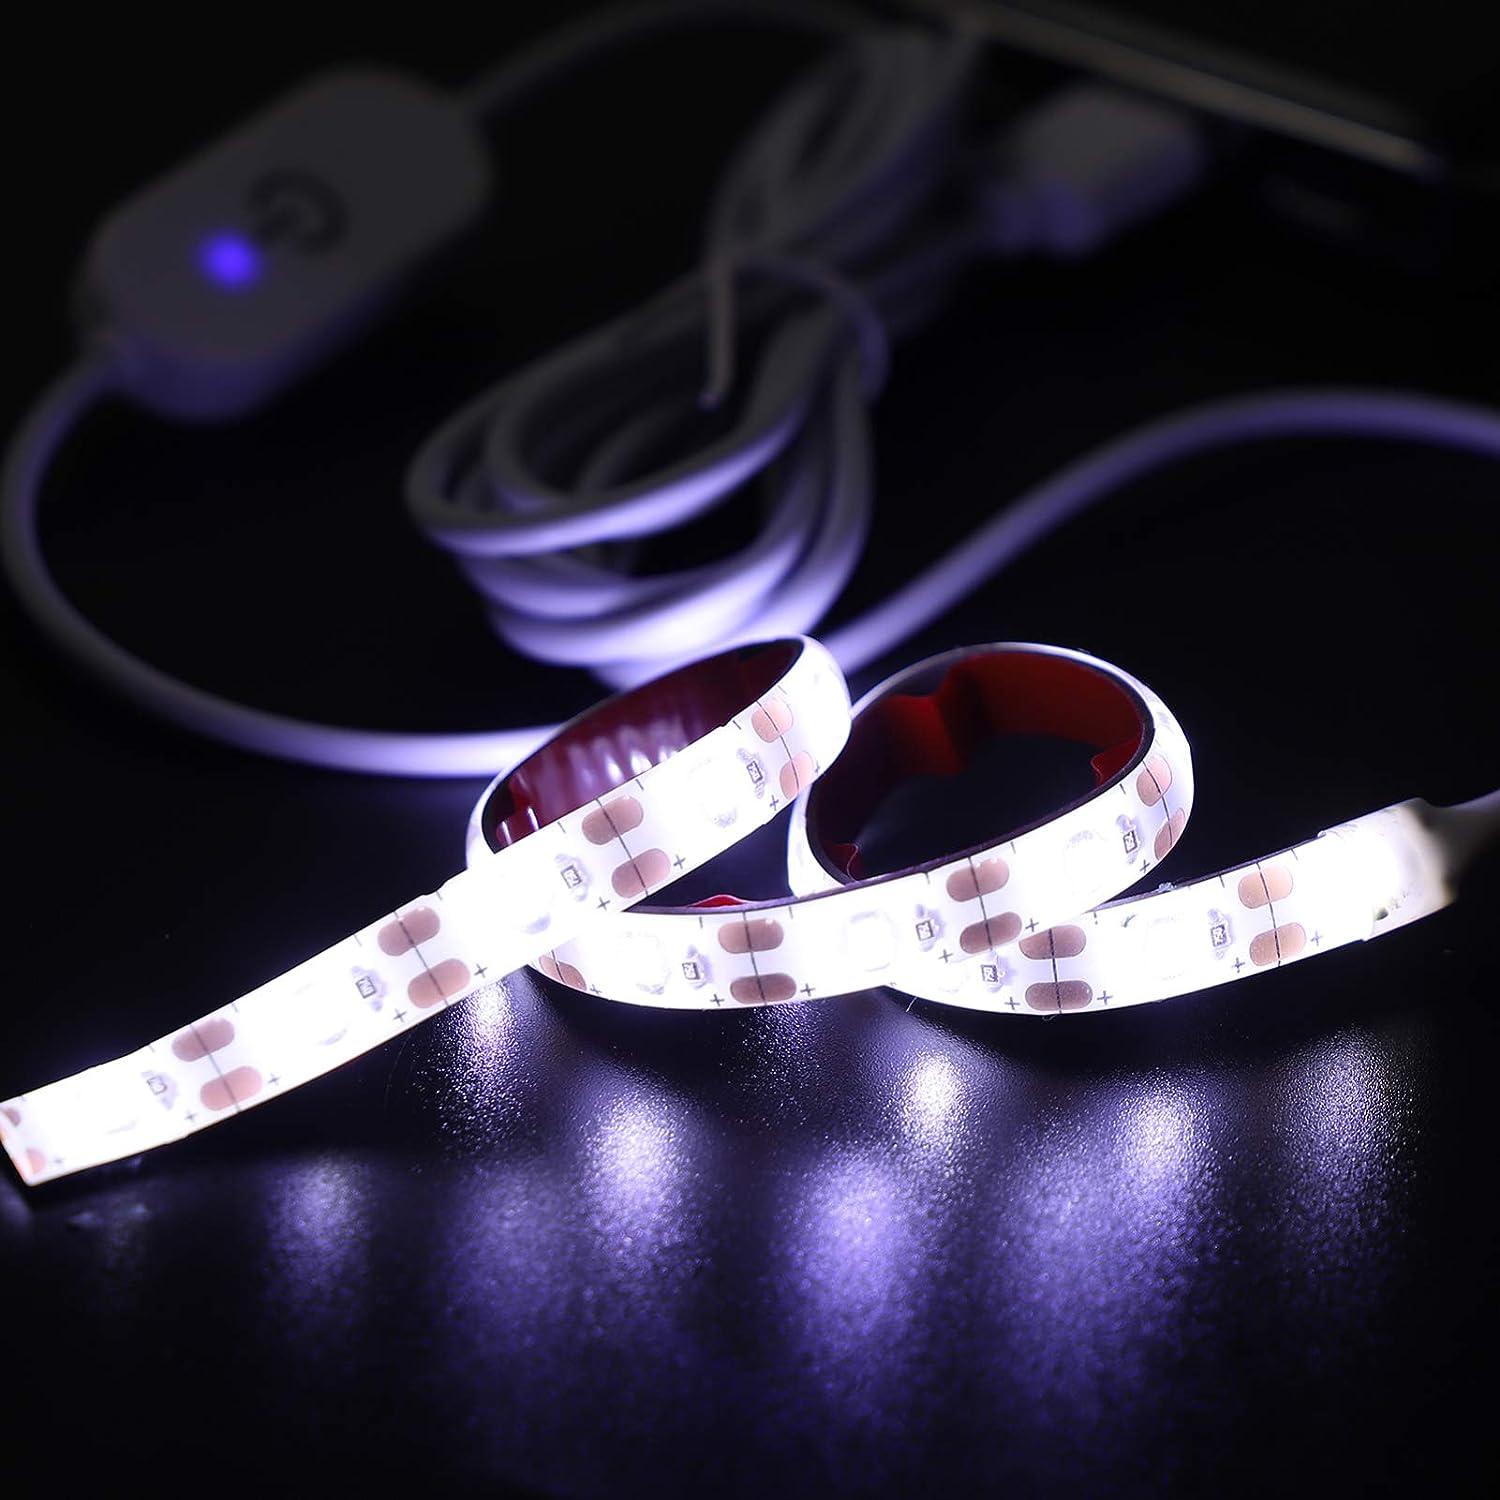 Mobestech LED Strips Sewing Machine Cold White Light Self-Adhesive LED Strip Light 2 Meters 5V USB 6500K